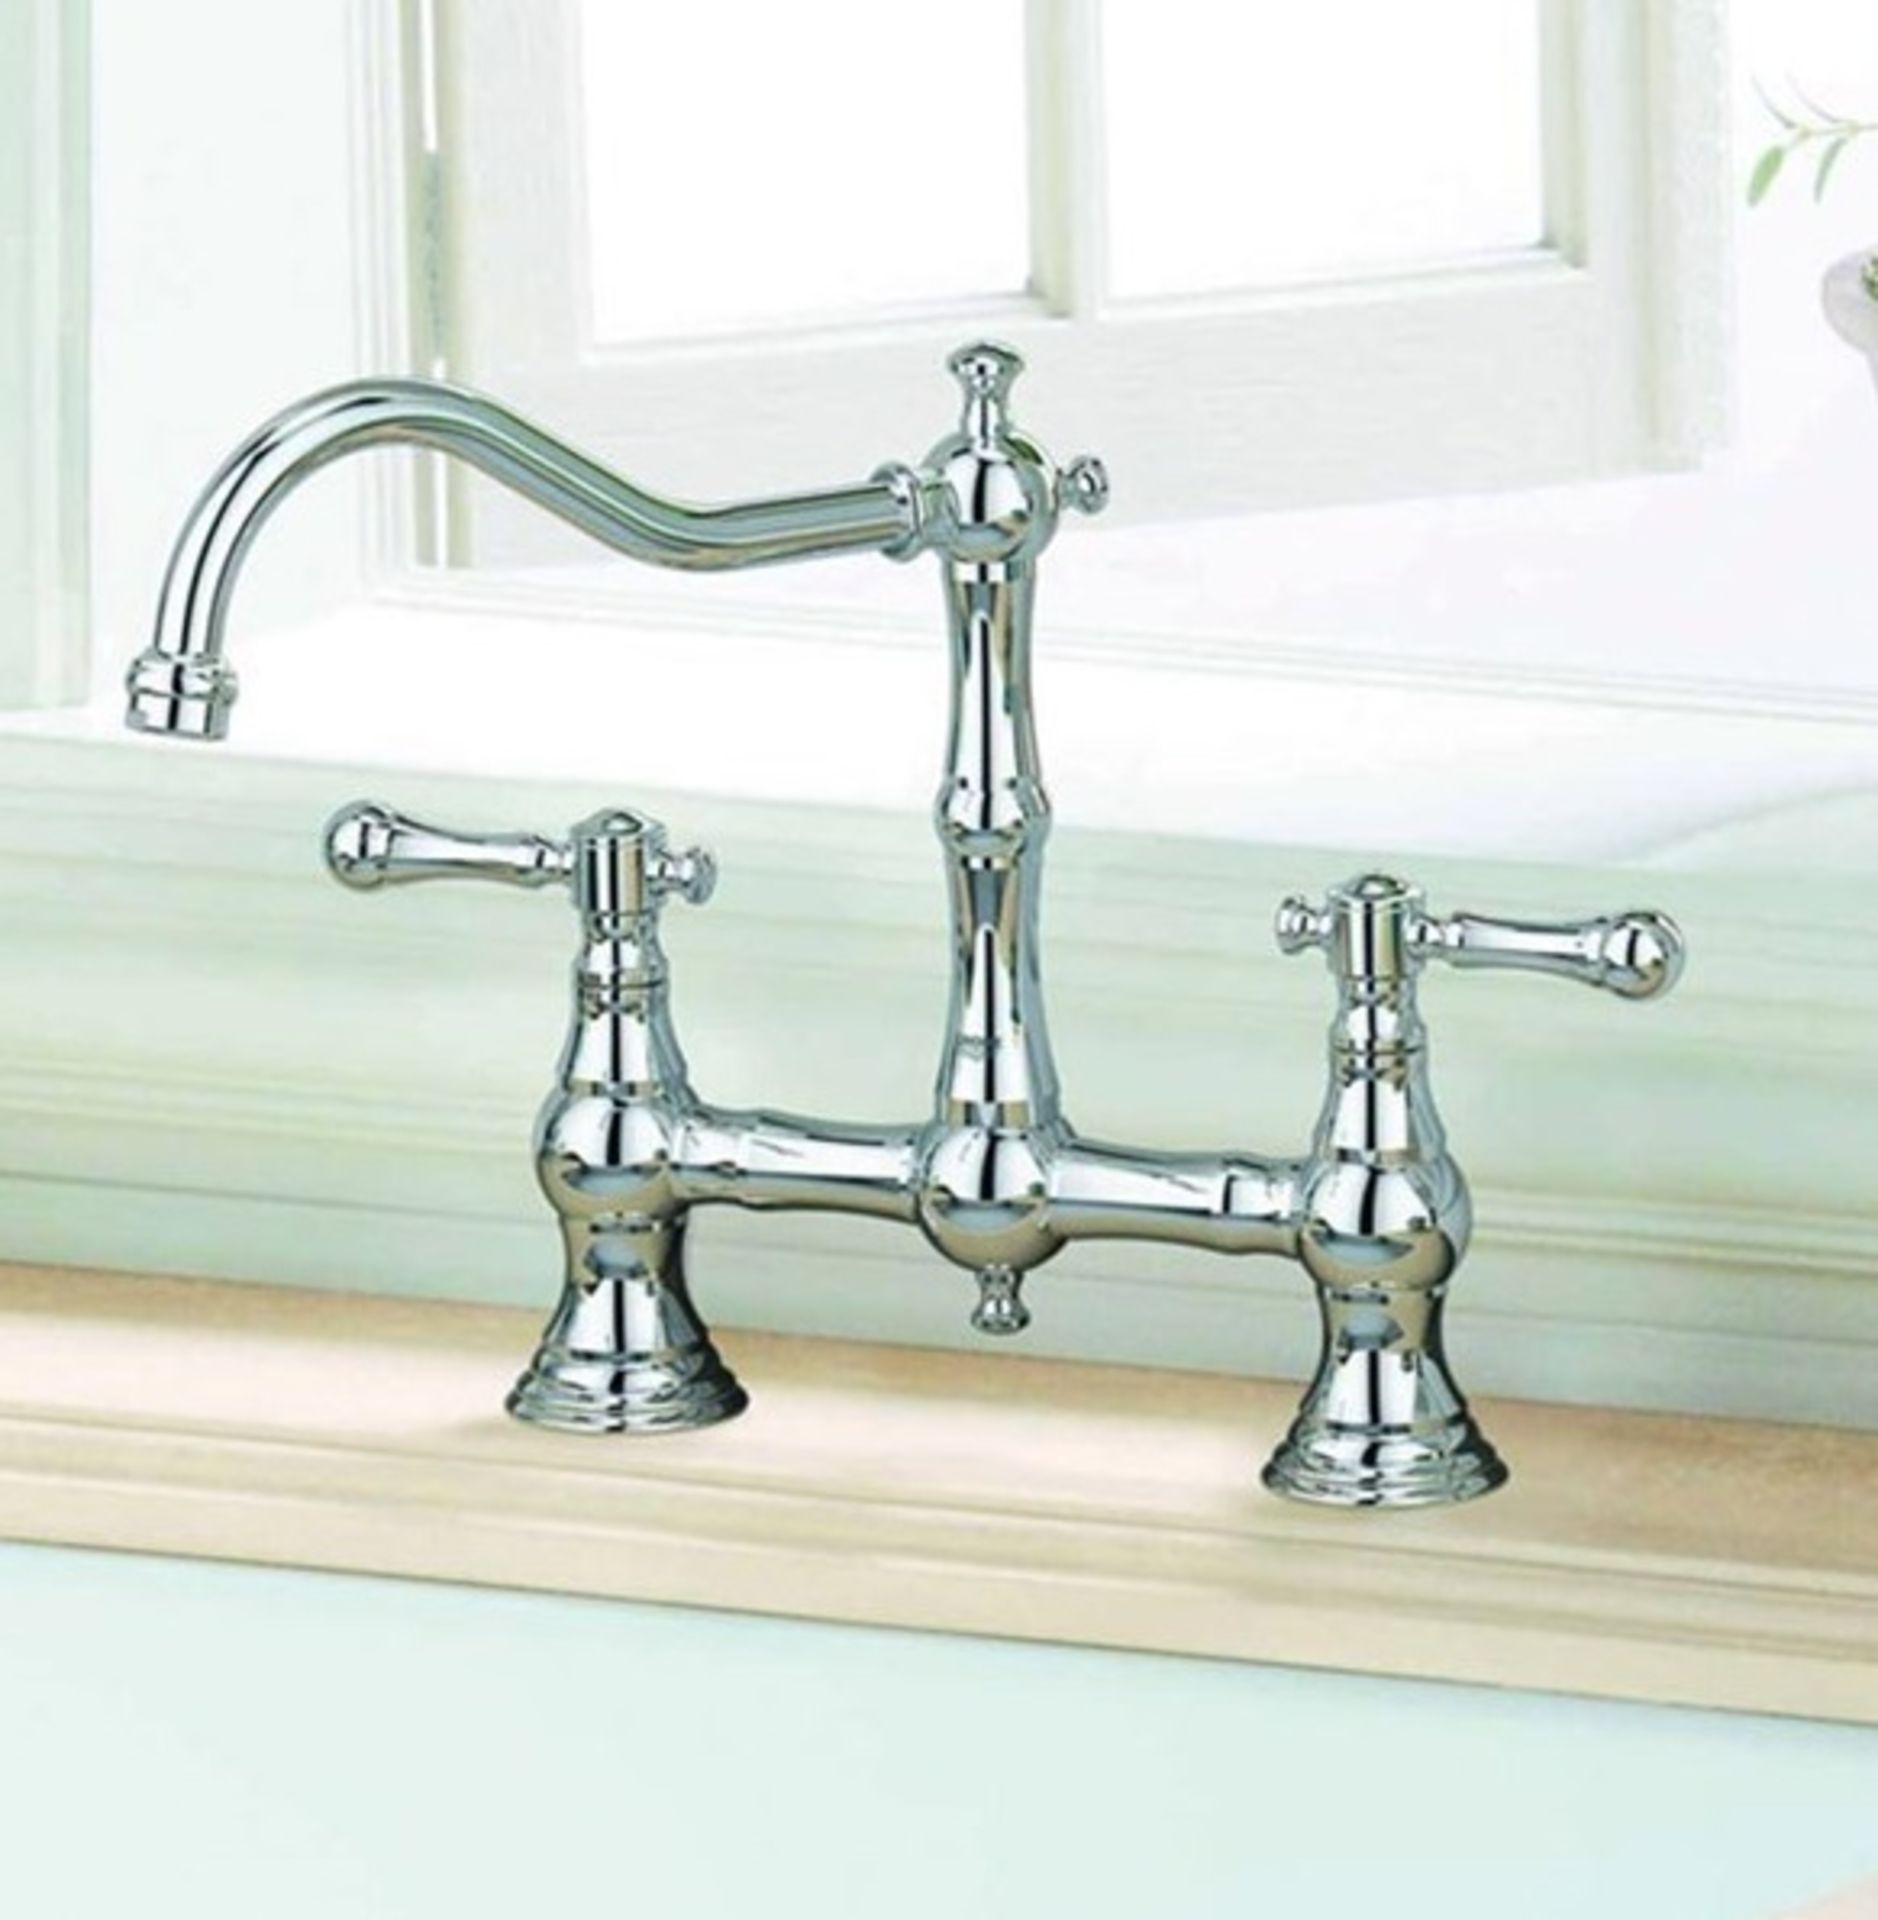 1 x Grohe "Bridgeford" Twin Bridge KITCHEN Sink Mixer With Swivel Spout - Deck Mounted - Chrome - Image 2 of 3